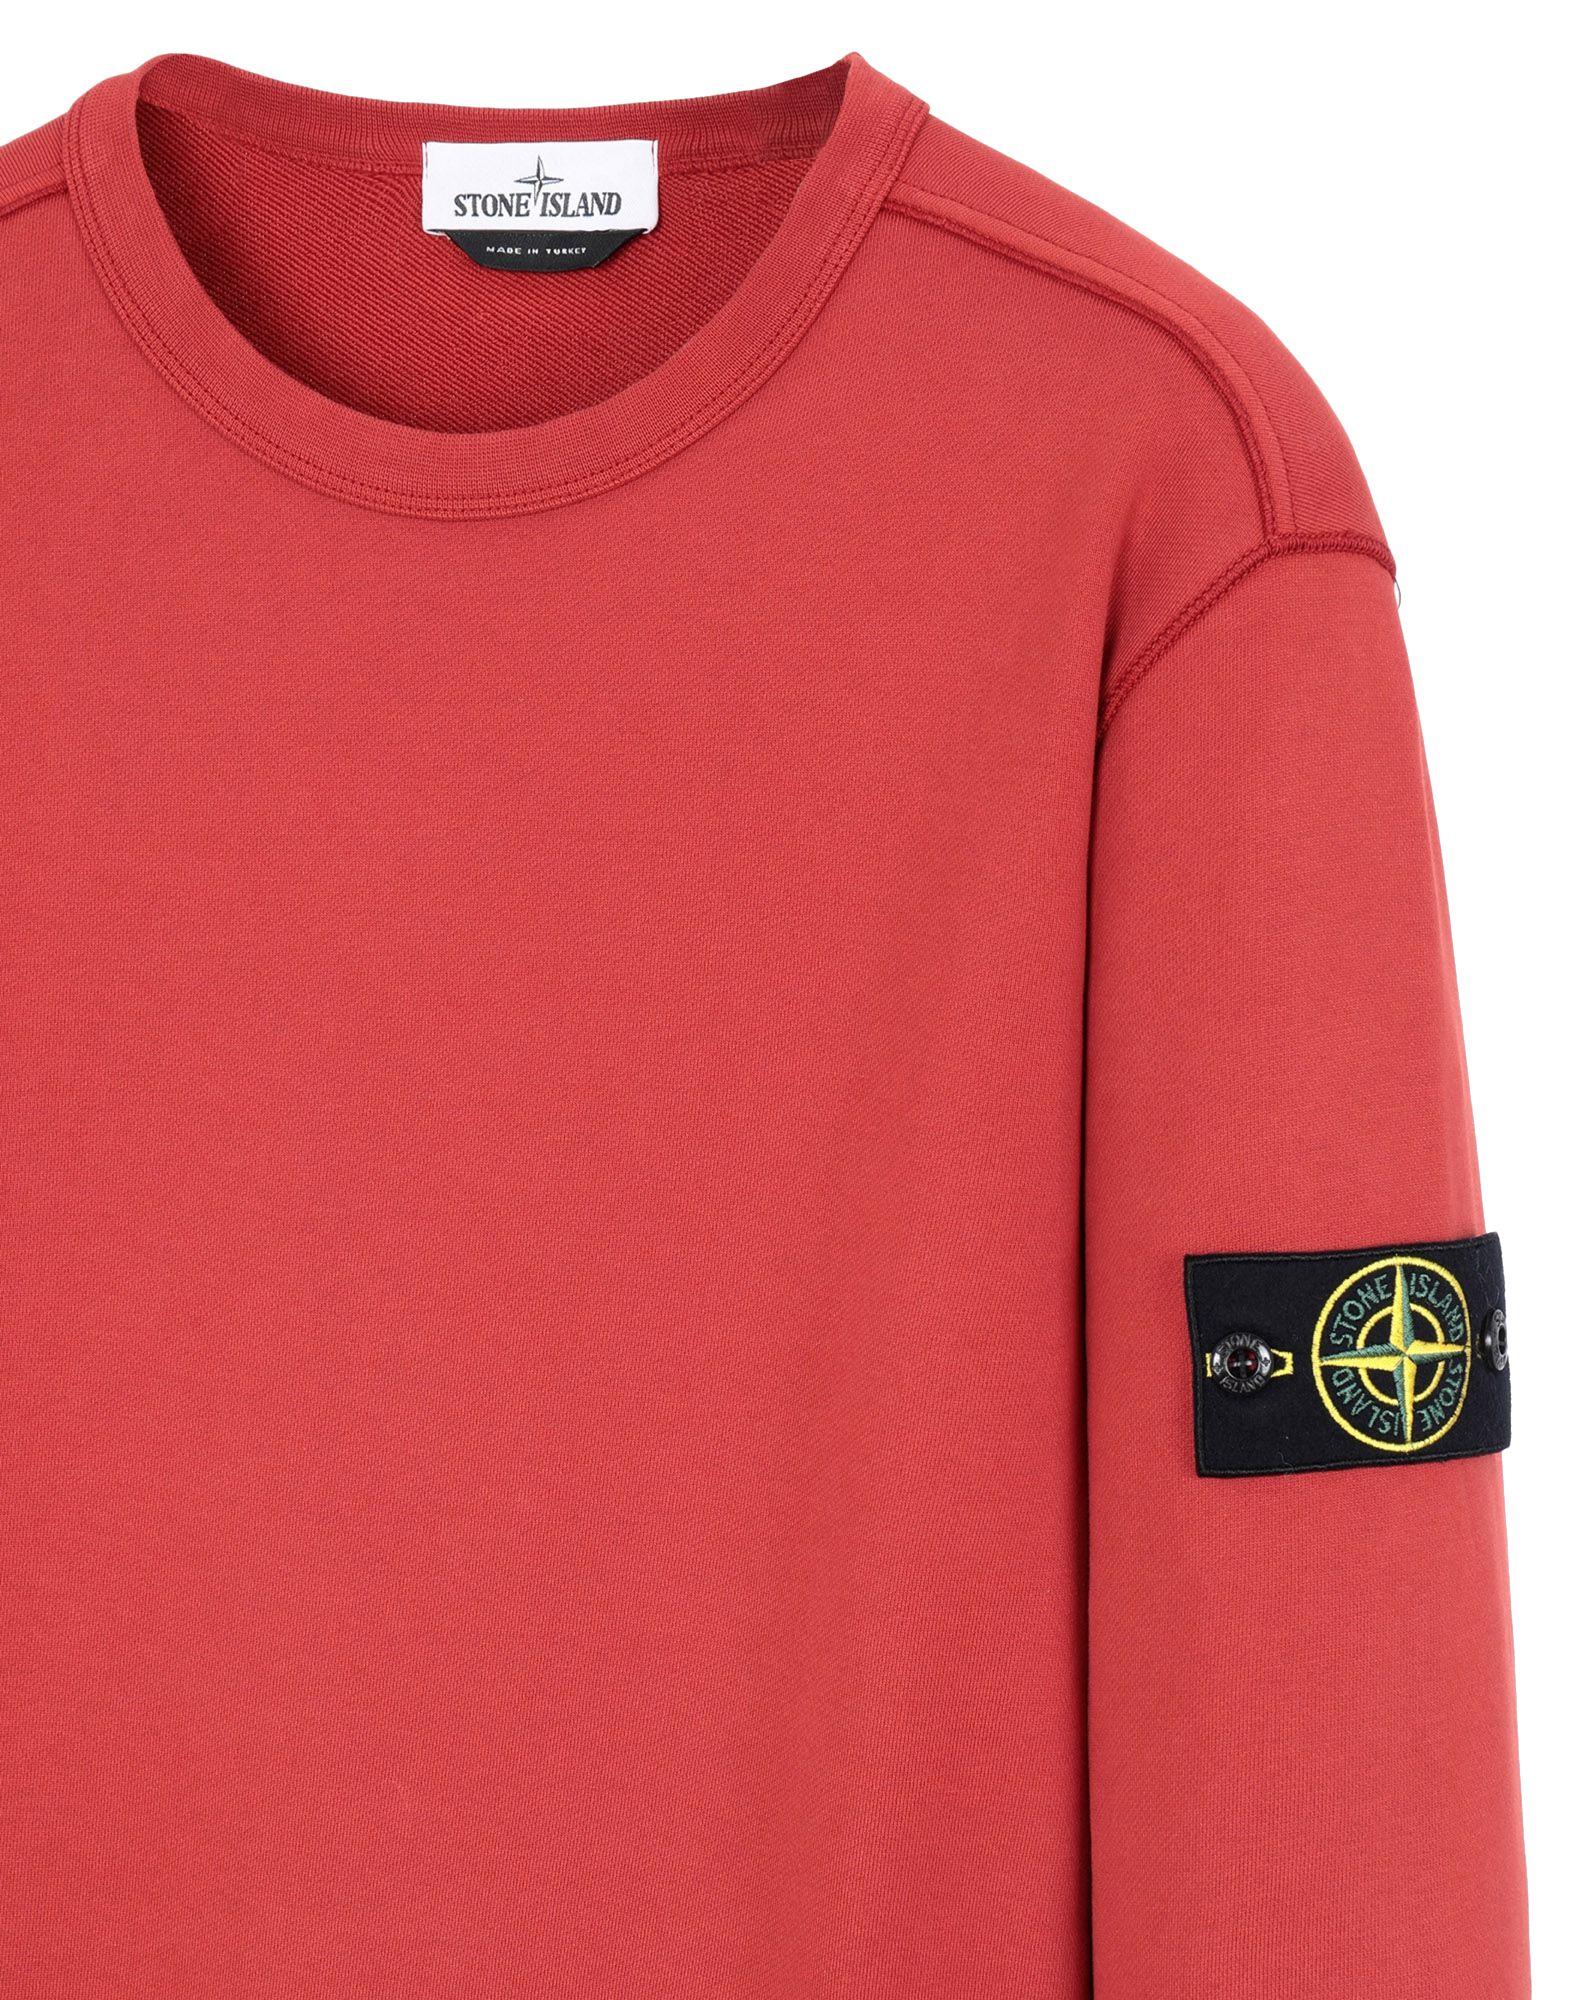 Stone Island Cotton 62751 in Brick Red (Red) for Men - Lyst